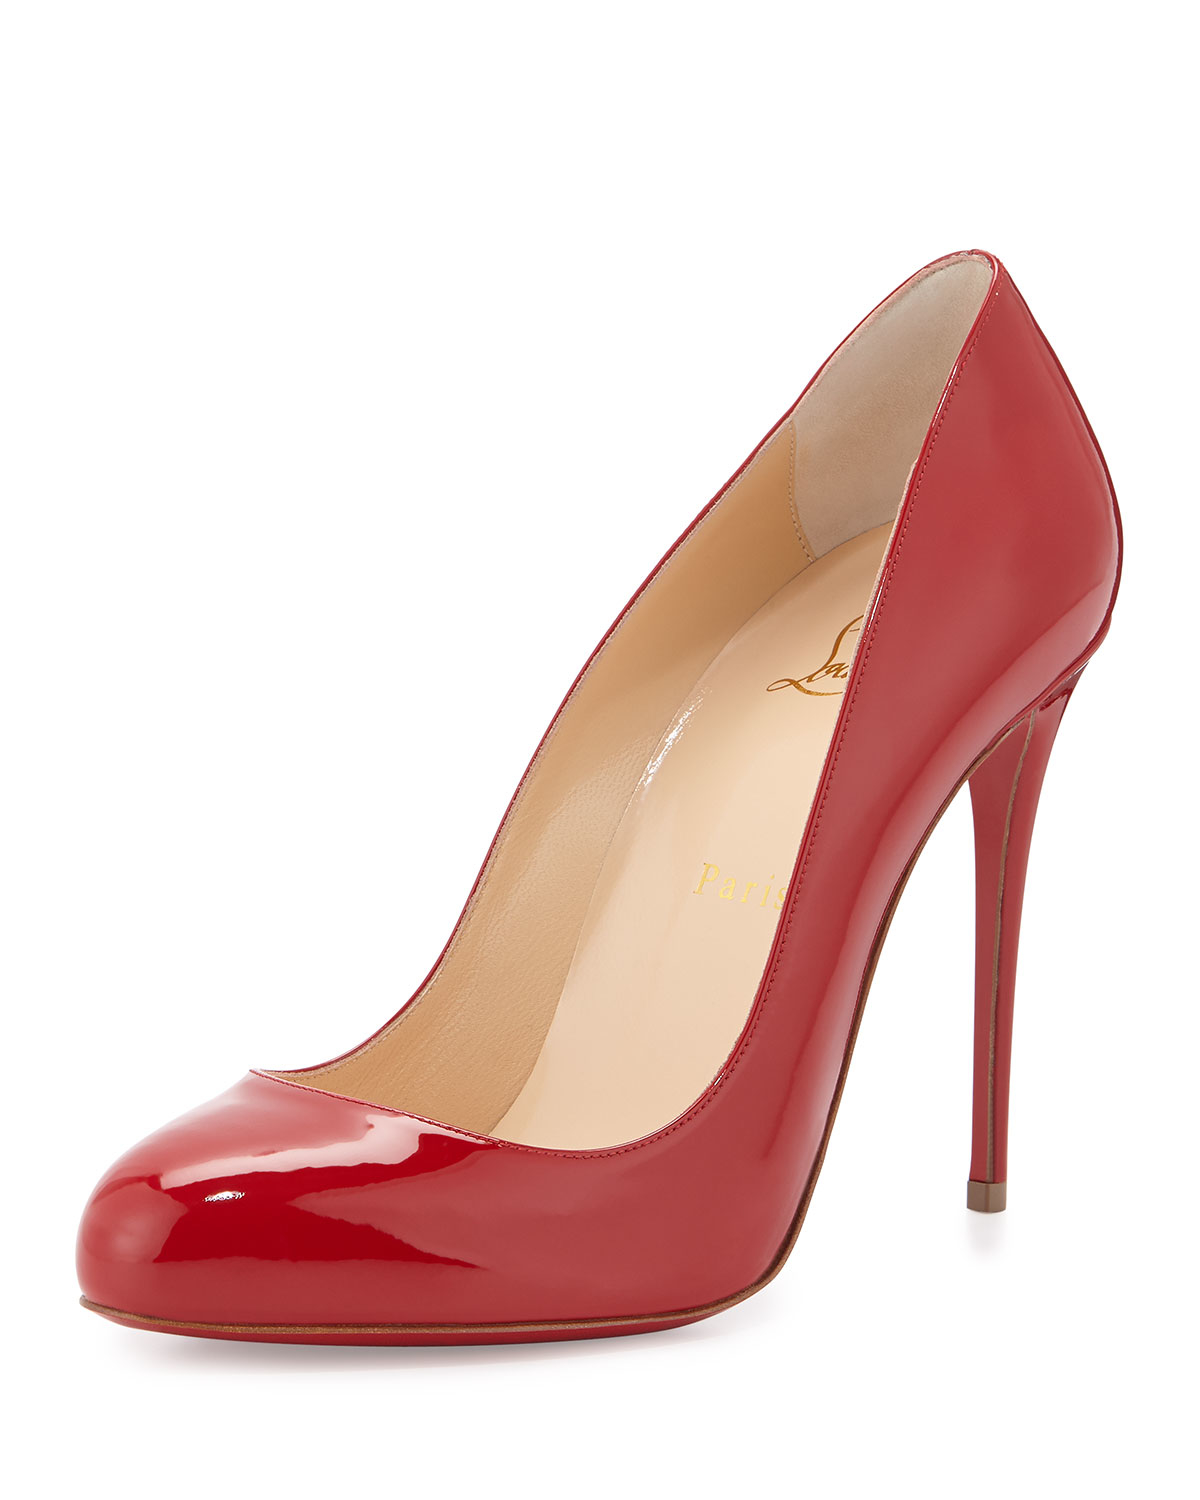 Lyst - Christian Louboutin Dorissima Patent Leather Pumps in Red